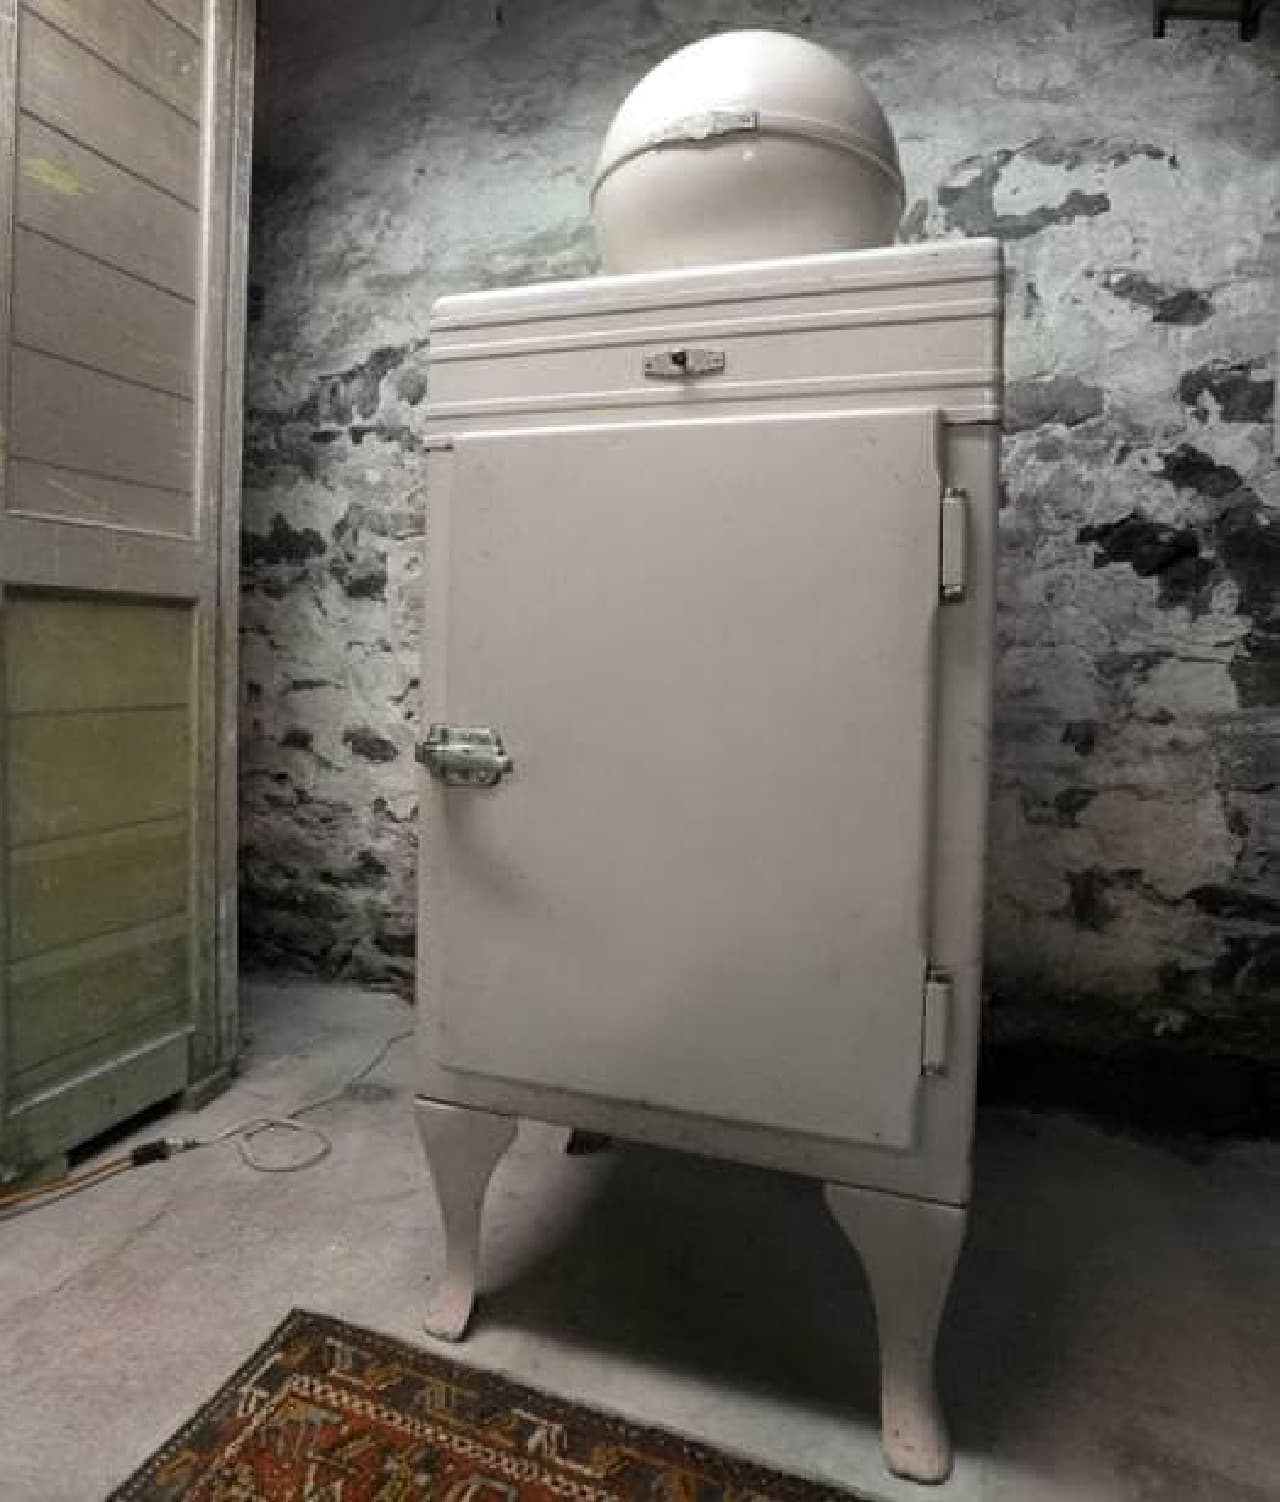 The upper part is equipped with a glove top cooler that is characteristic of refrigerators of this era (Source: New York Post)